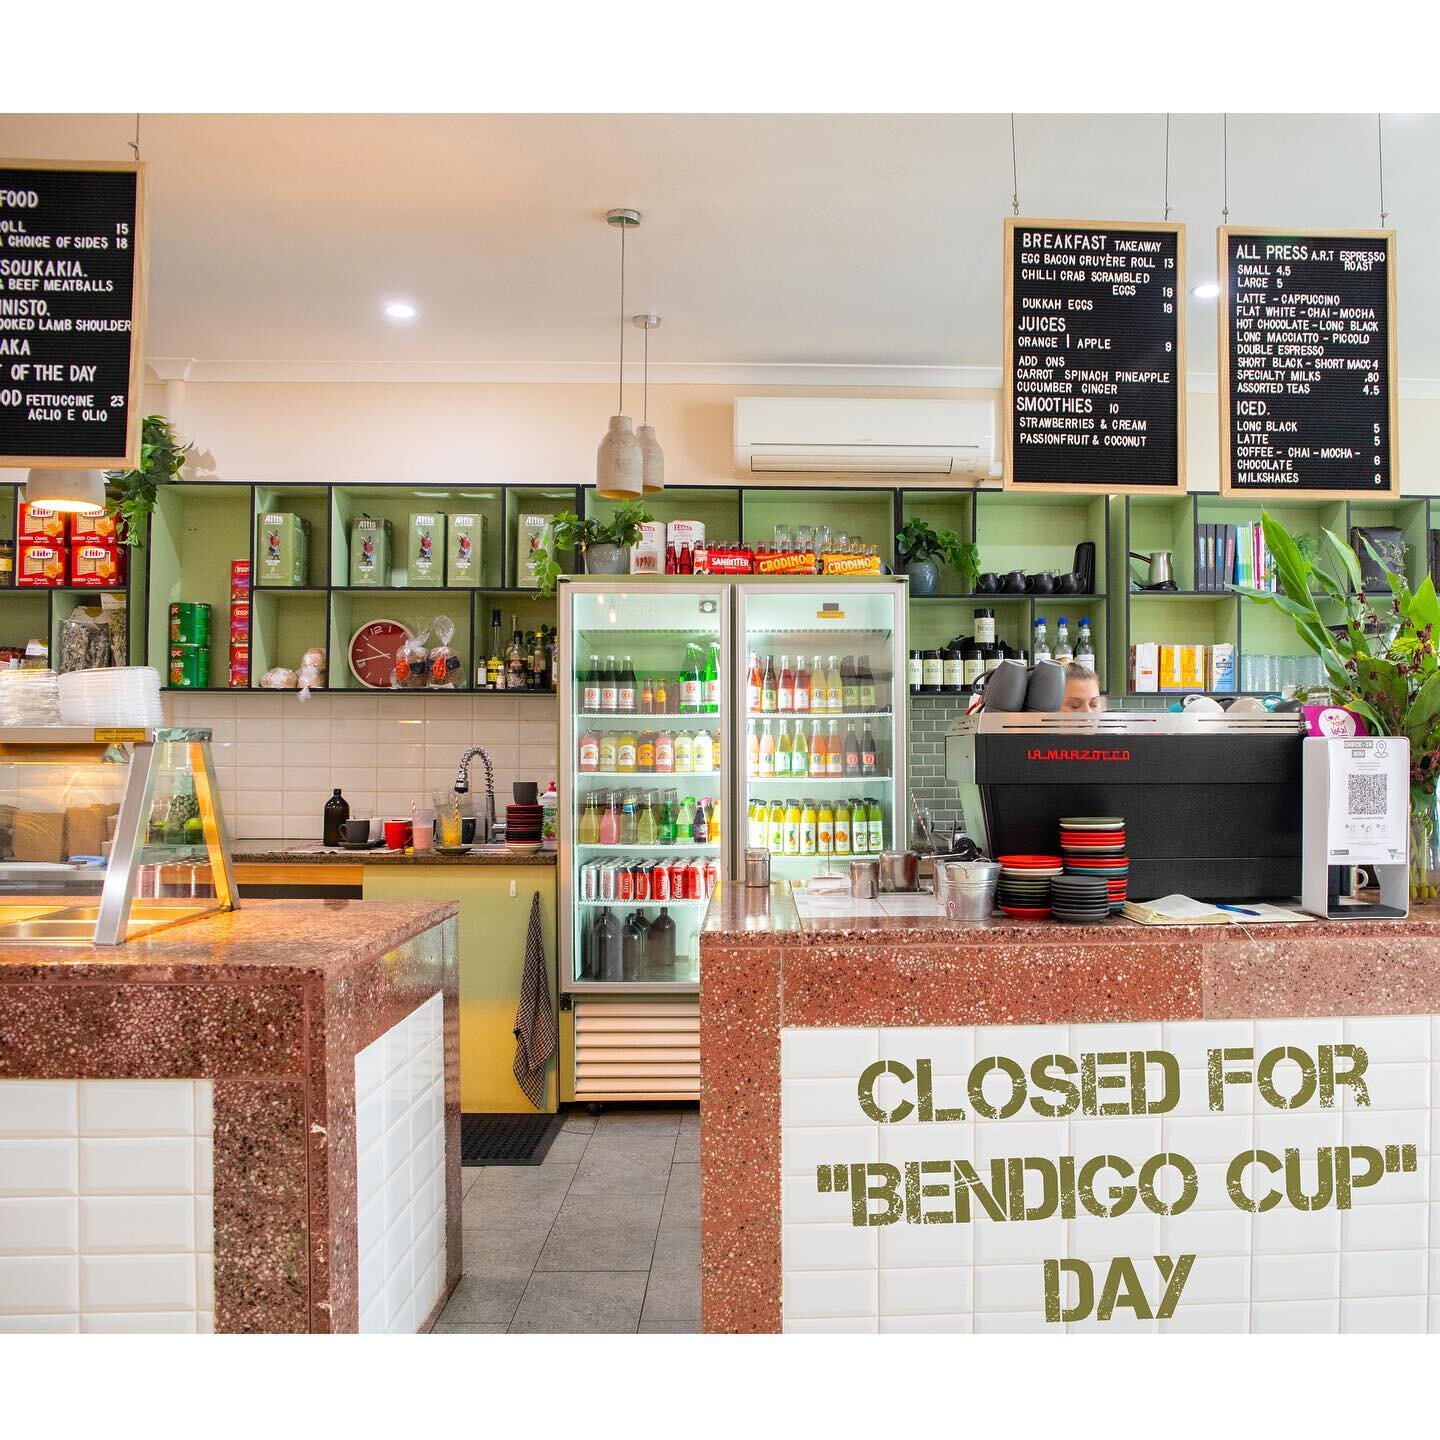 BayLeaf will be closed on Wednesday for &ldquo;Bendigo Cup&rdquo; day